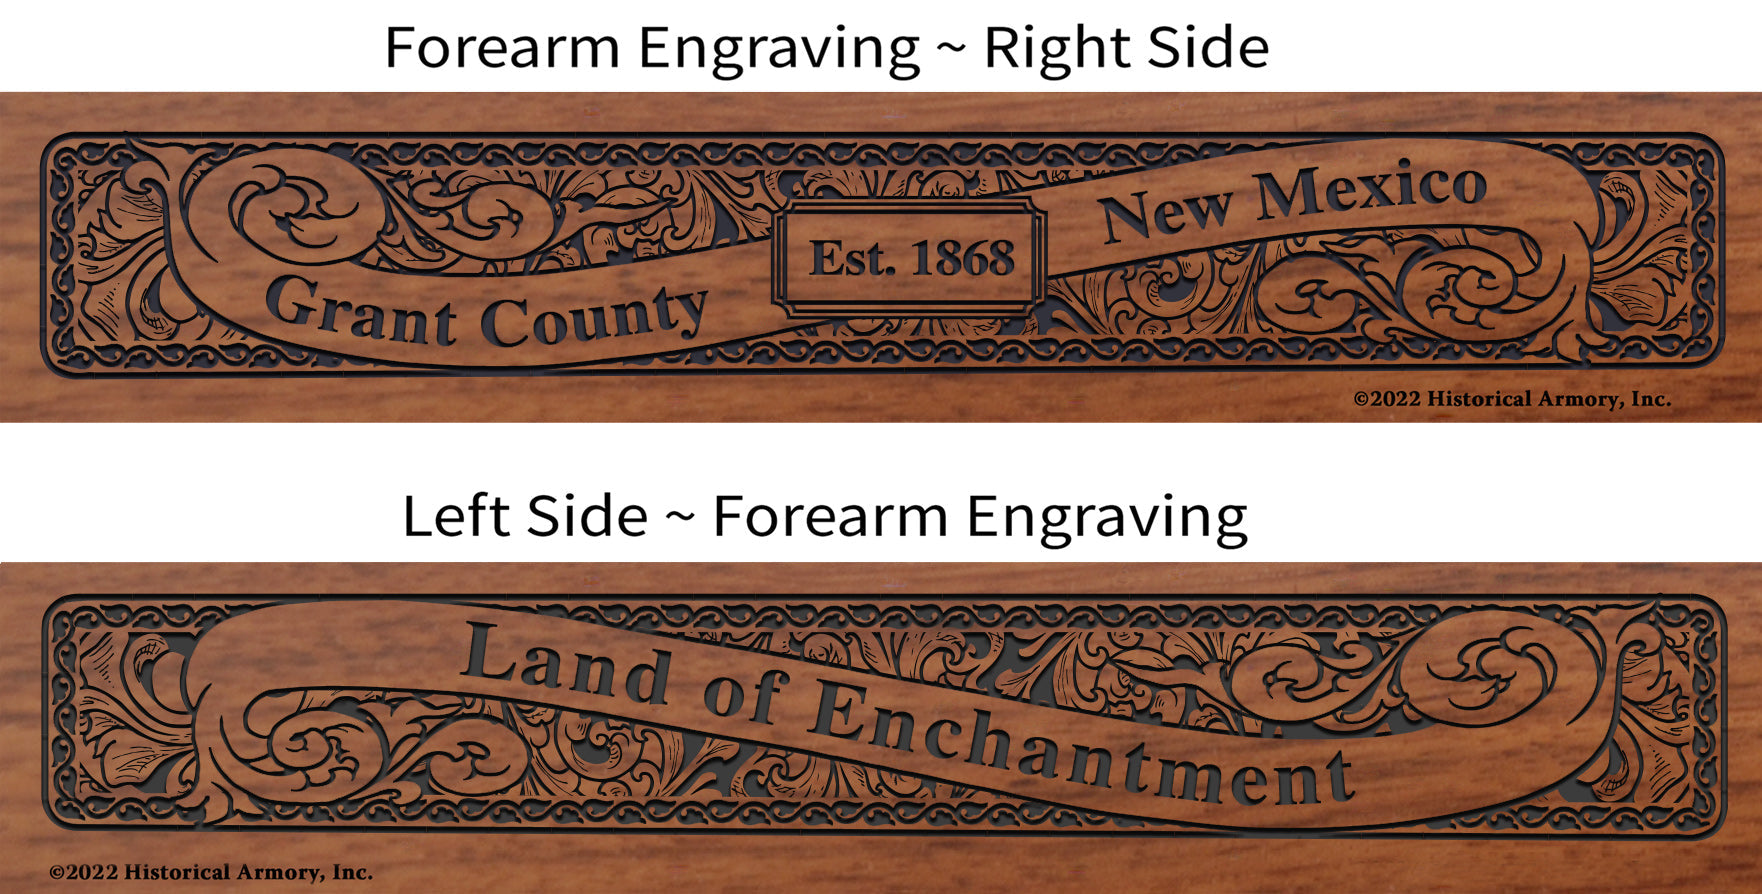 Grant County New Mexico Engraved Rifle Forearm